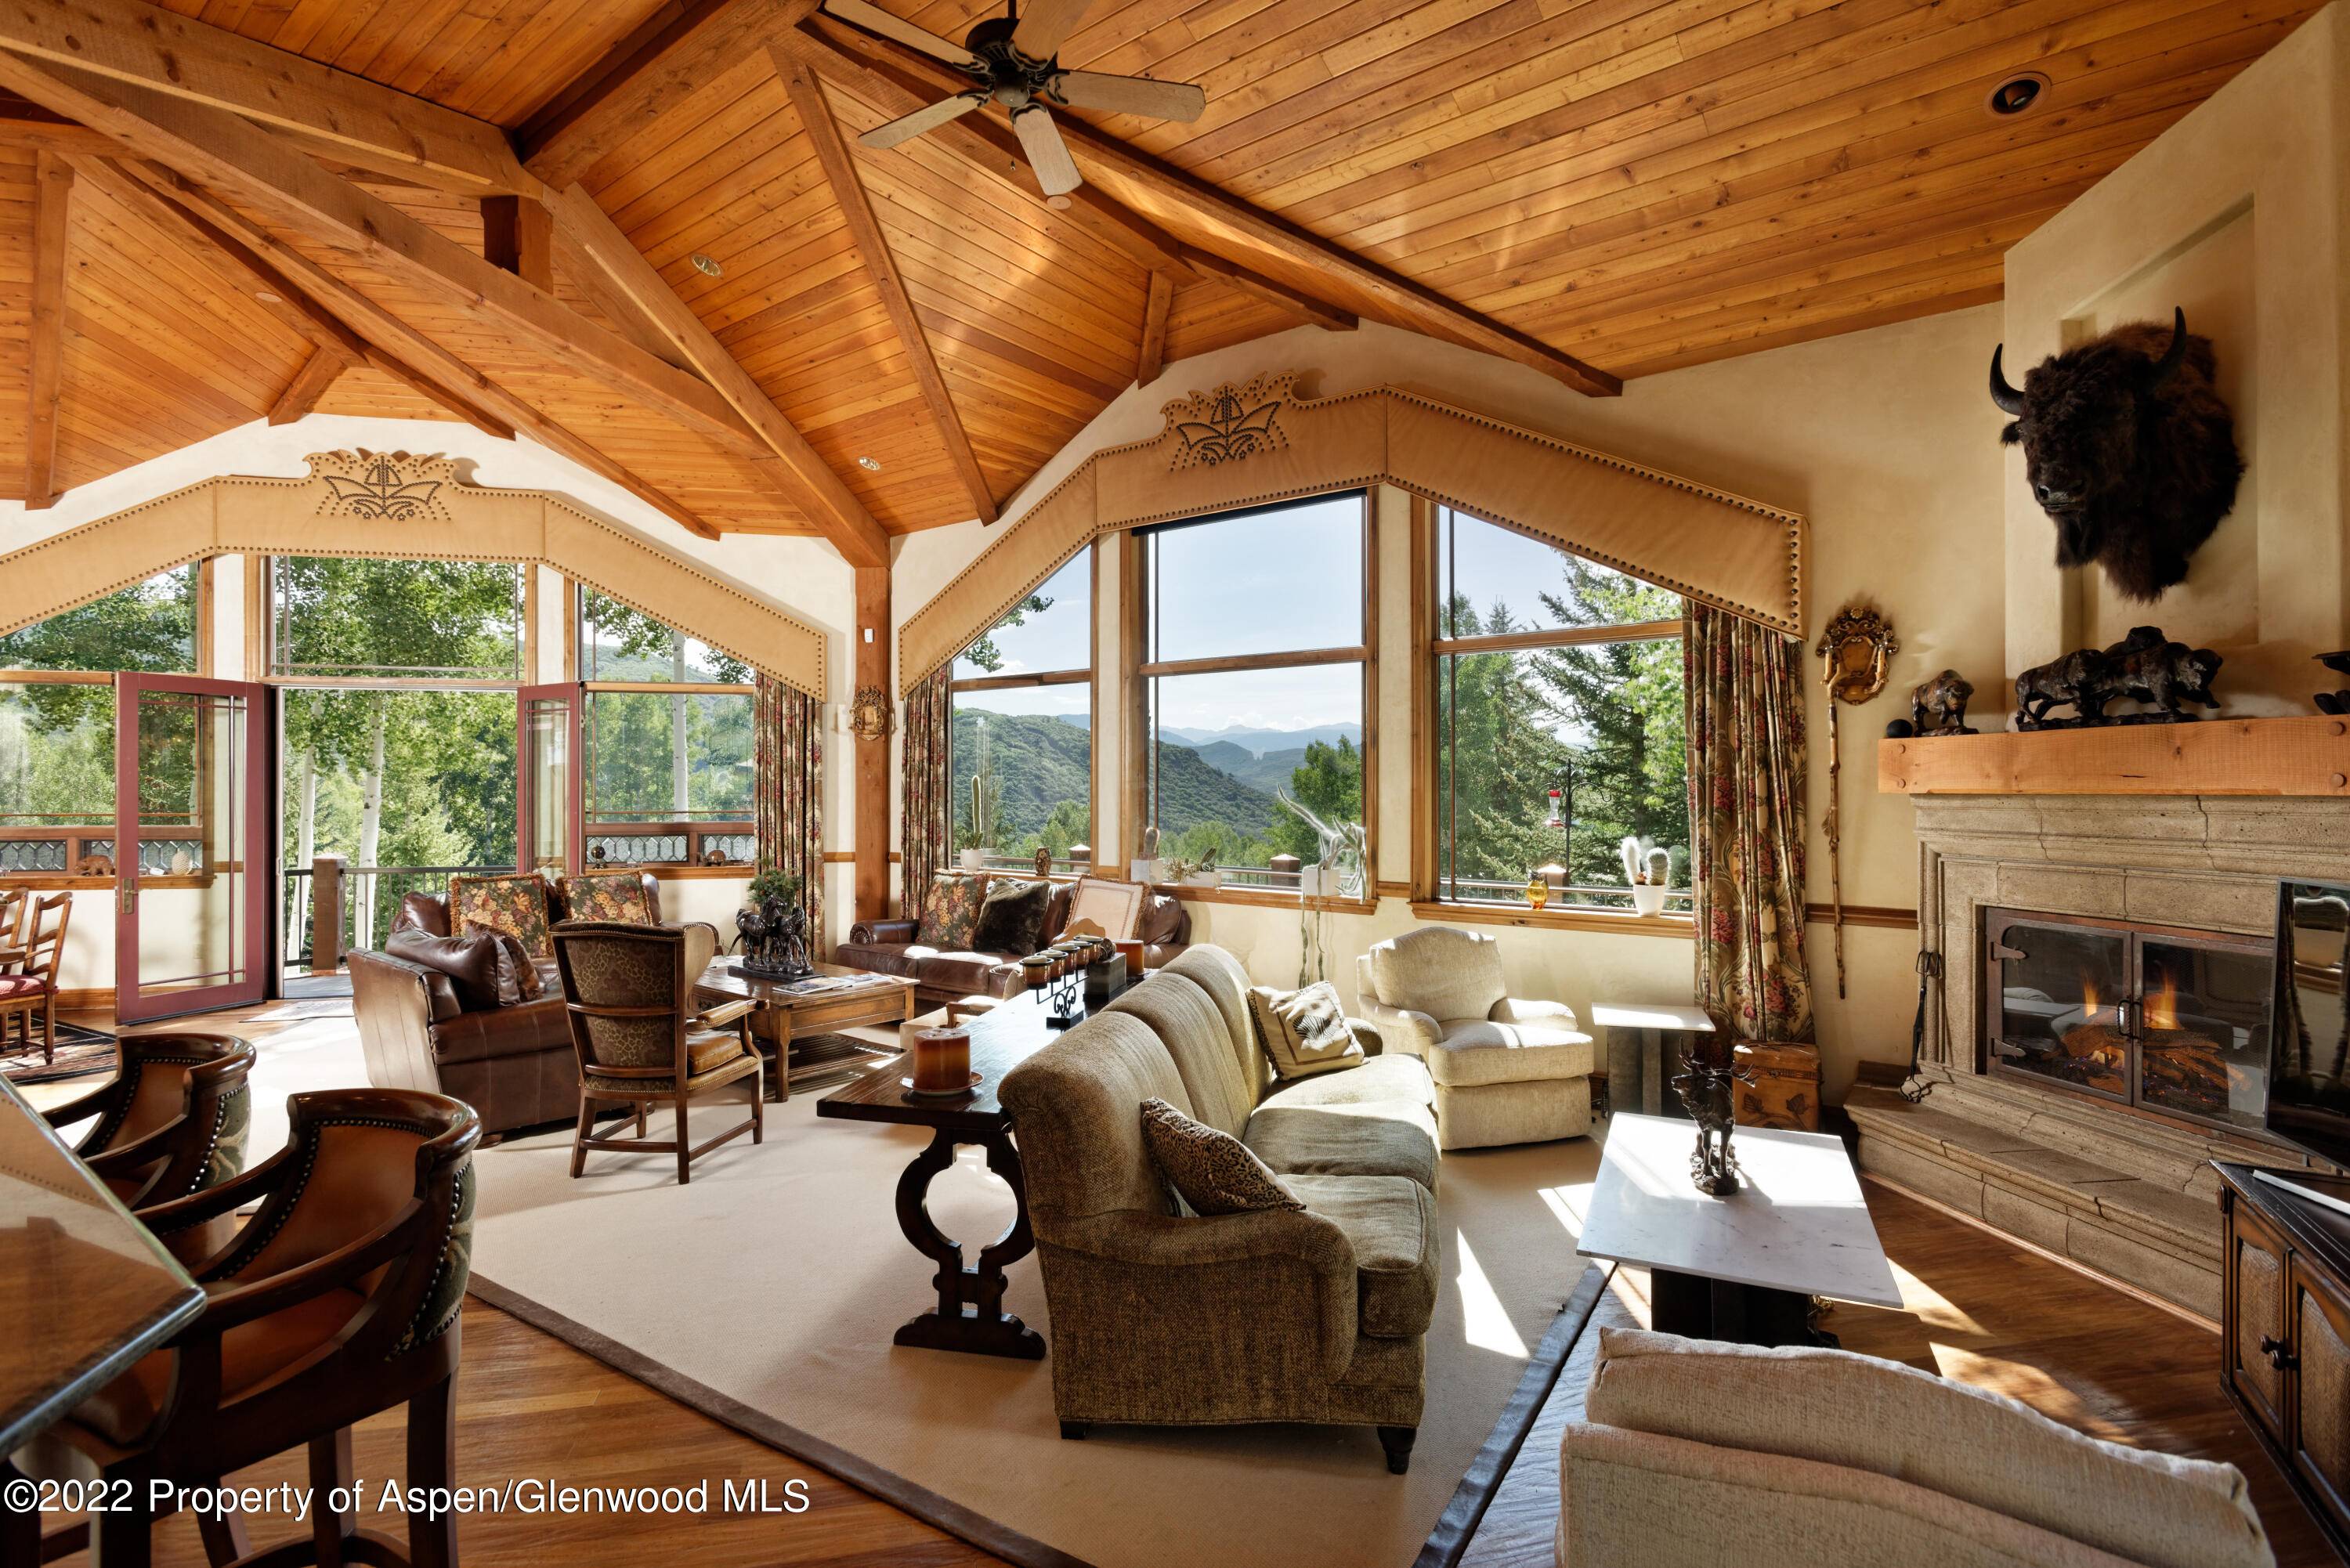 This 4 bedroom Horse Ranch home in Snowmass Village has the best of all worlds.